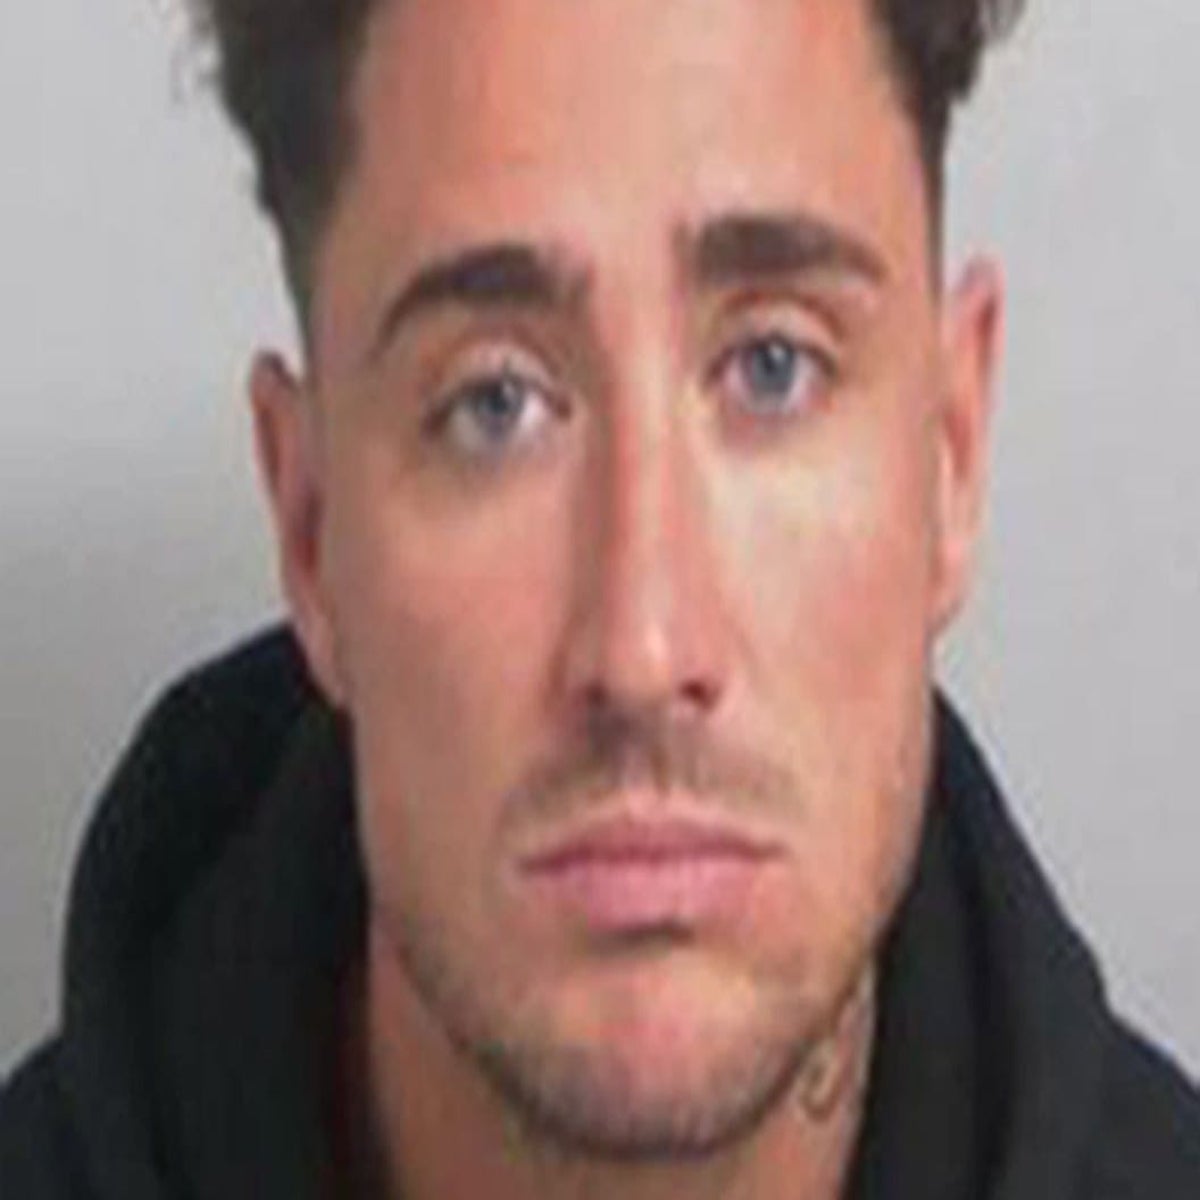 Big Brother Star Sex Tape - Reality TV star Stephen Bear jailed over sex video | The Independent